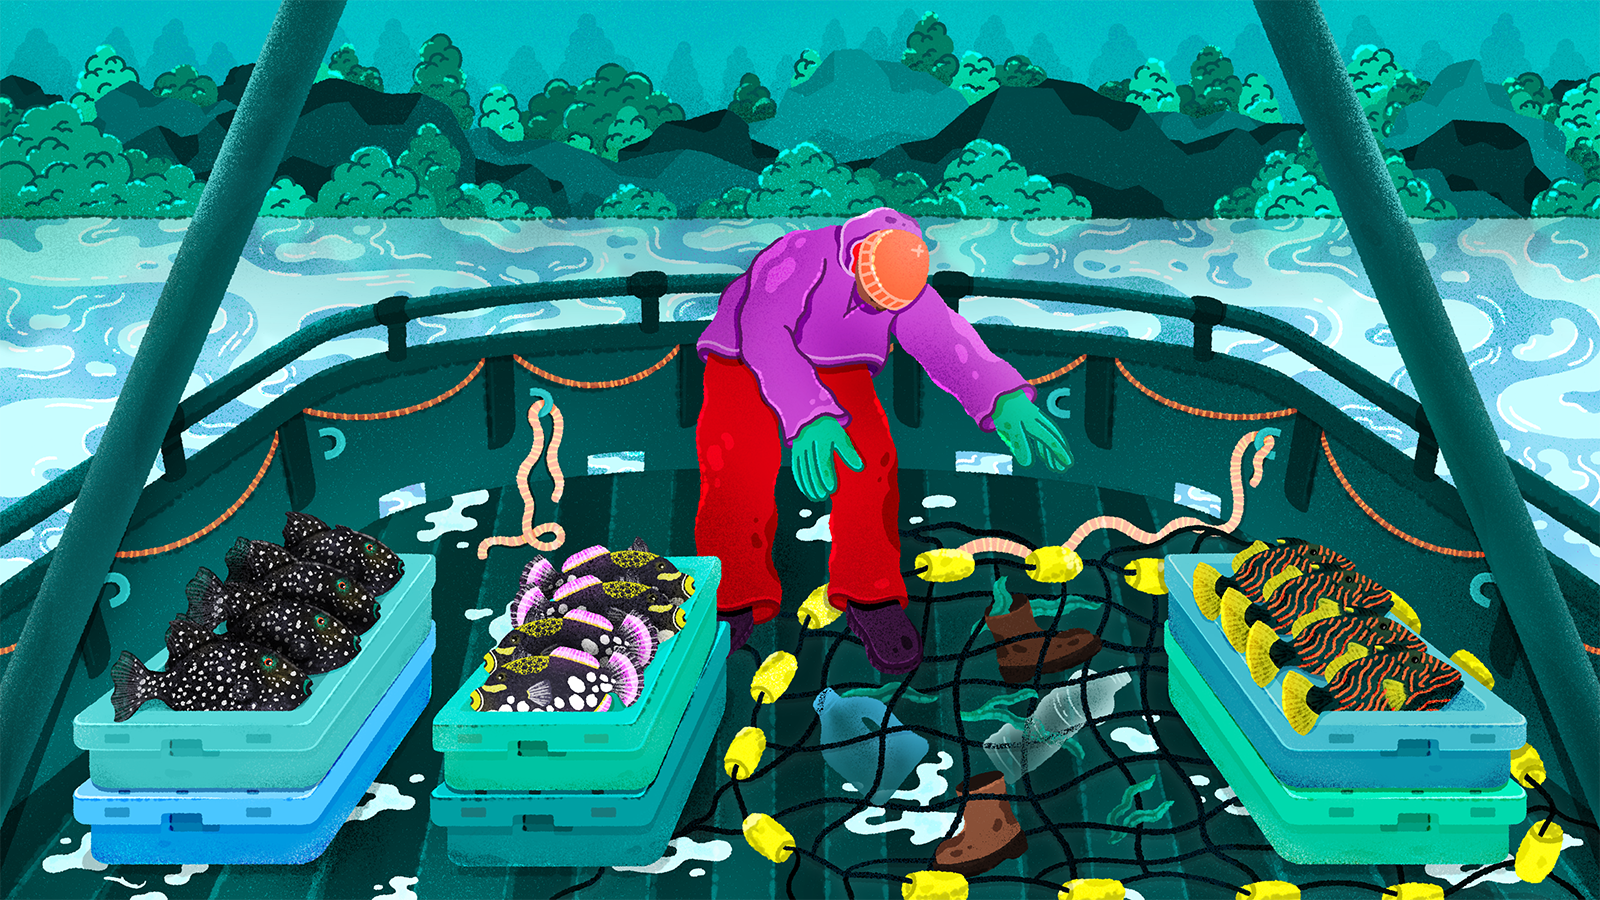 An illustration of a fisherman sorting his catch